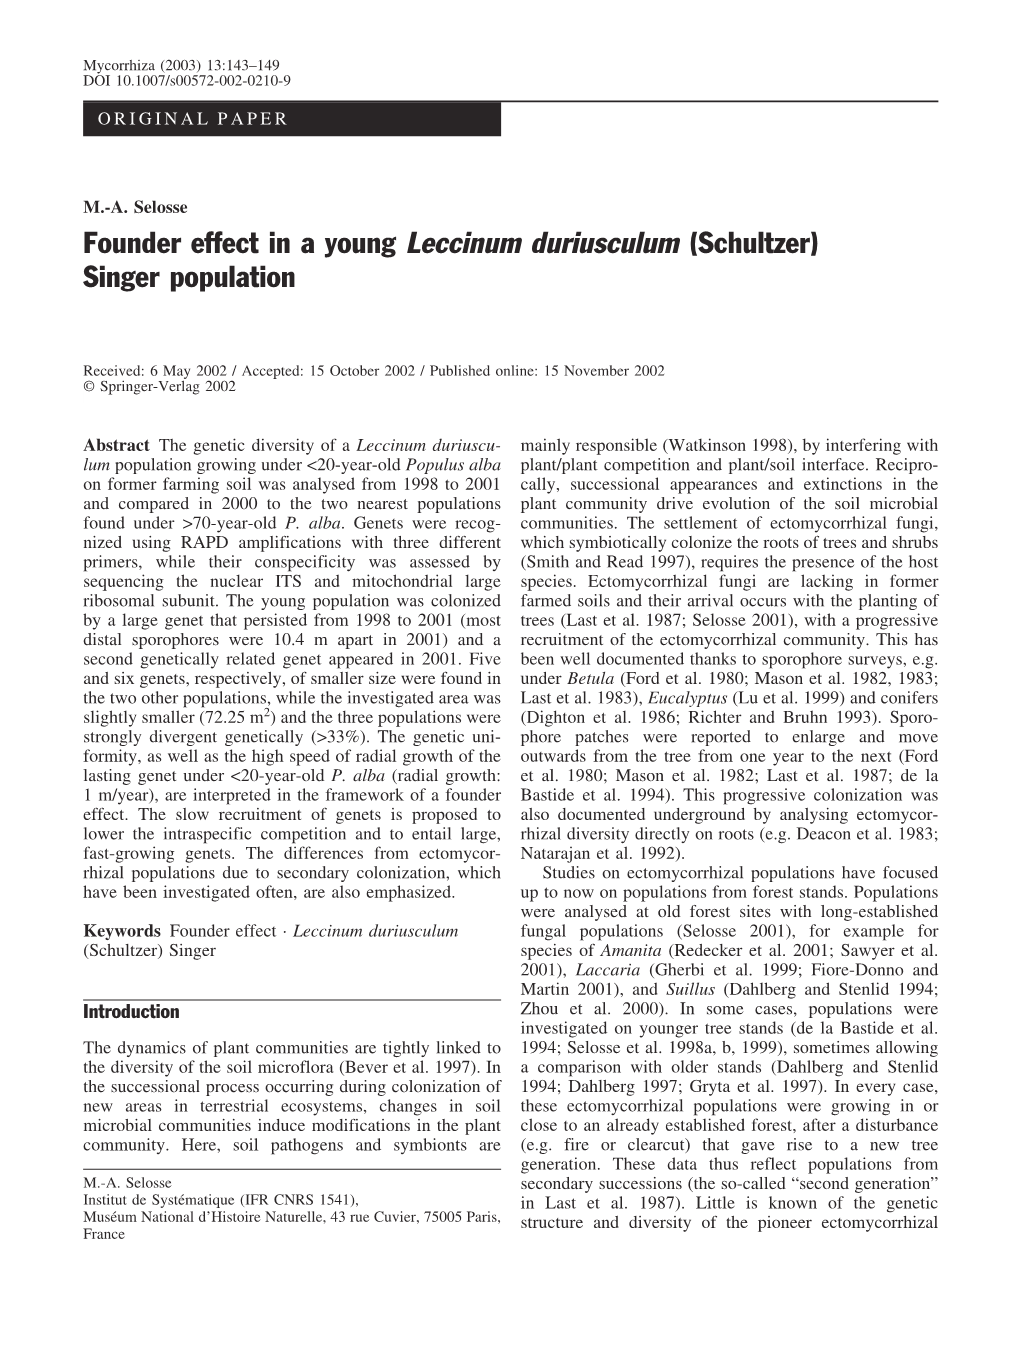 Founder Effect in a Young Leccinum Duriusculum (Schultzer) Singer Population